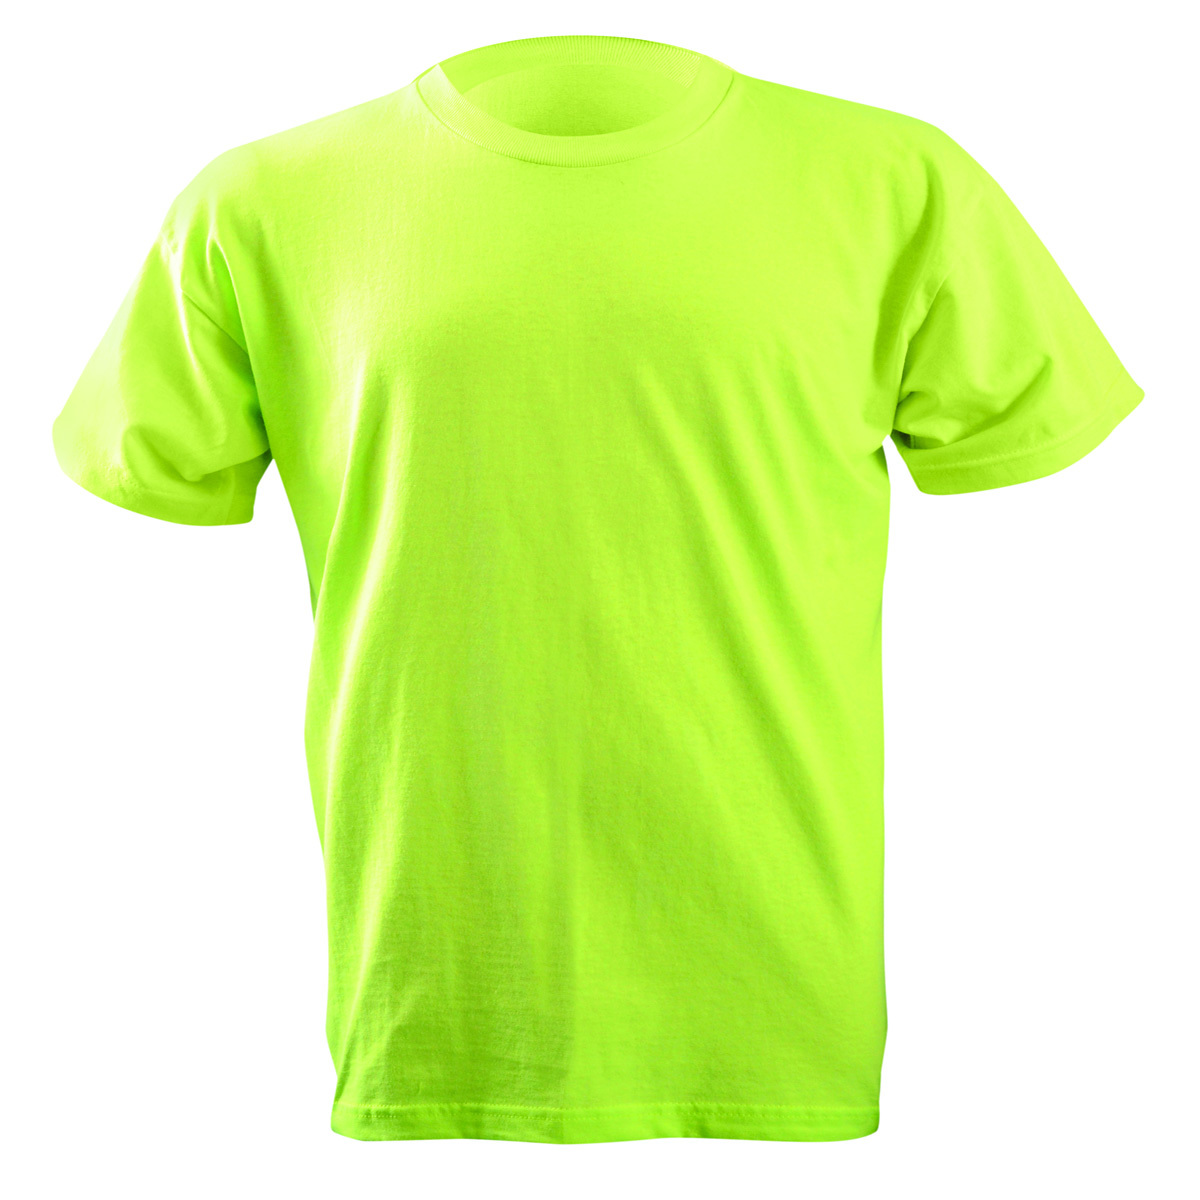 OccuNomix Large Yellow 6 Ounce Cotton T-Shirt